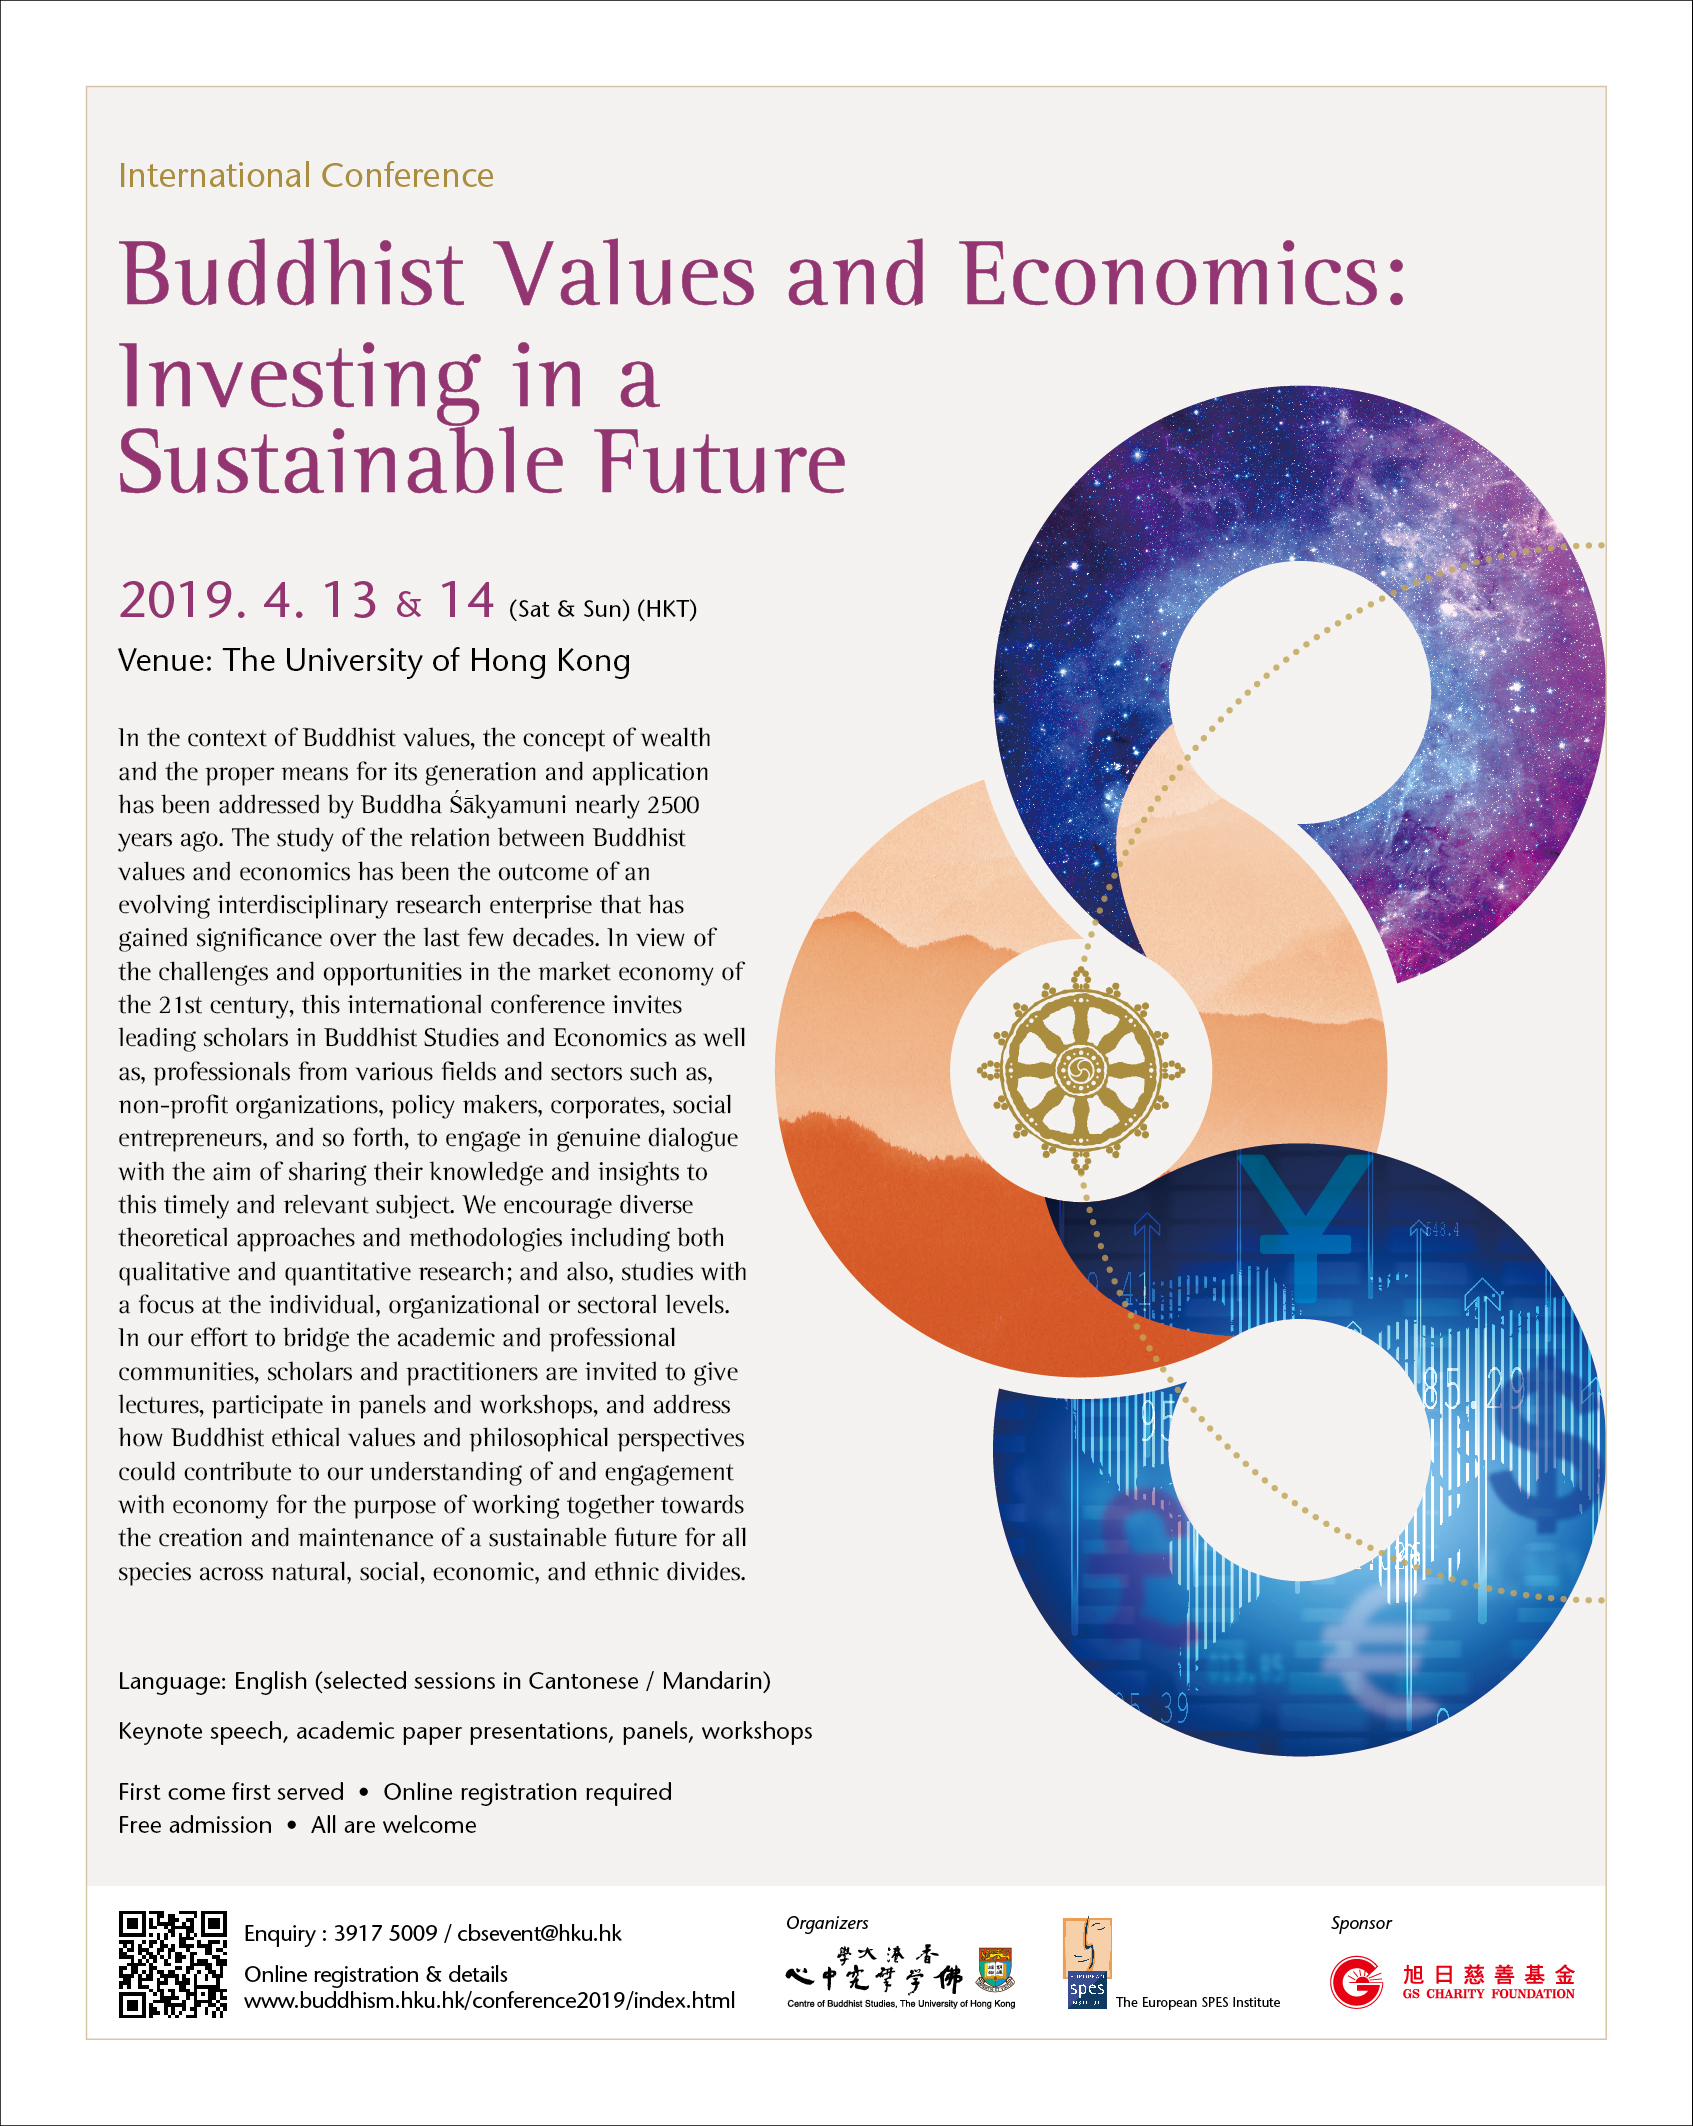 International Conference - Buddhist Values and Economics: Investing in a Sustainable Future